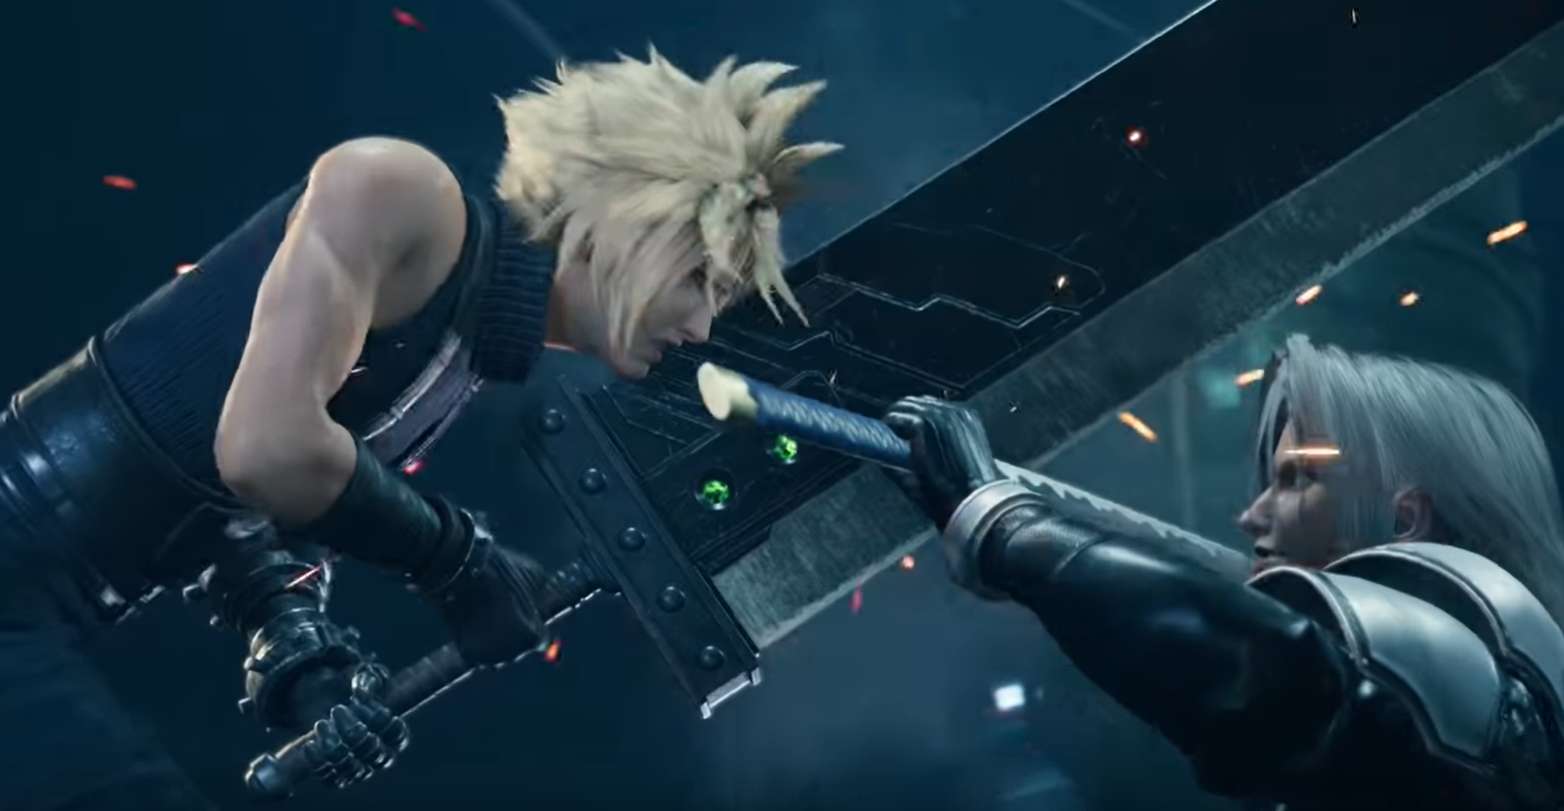 Final Fantasy 7 Remake Co-Director Talks About Bringing Characters From A Novel Into The Game